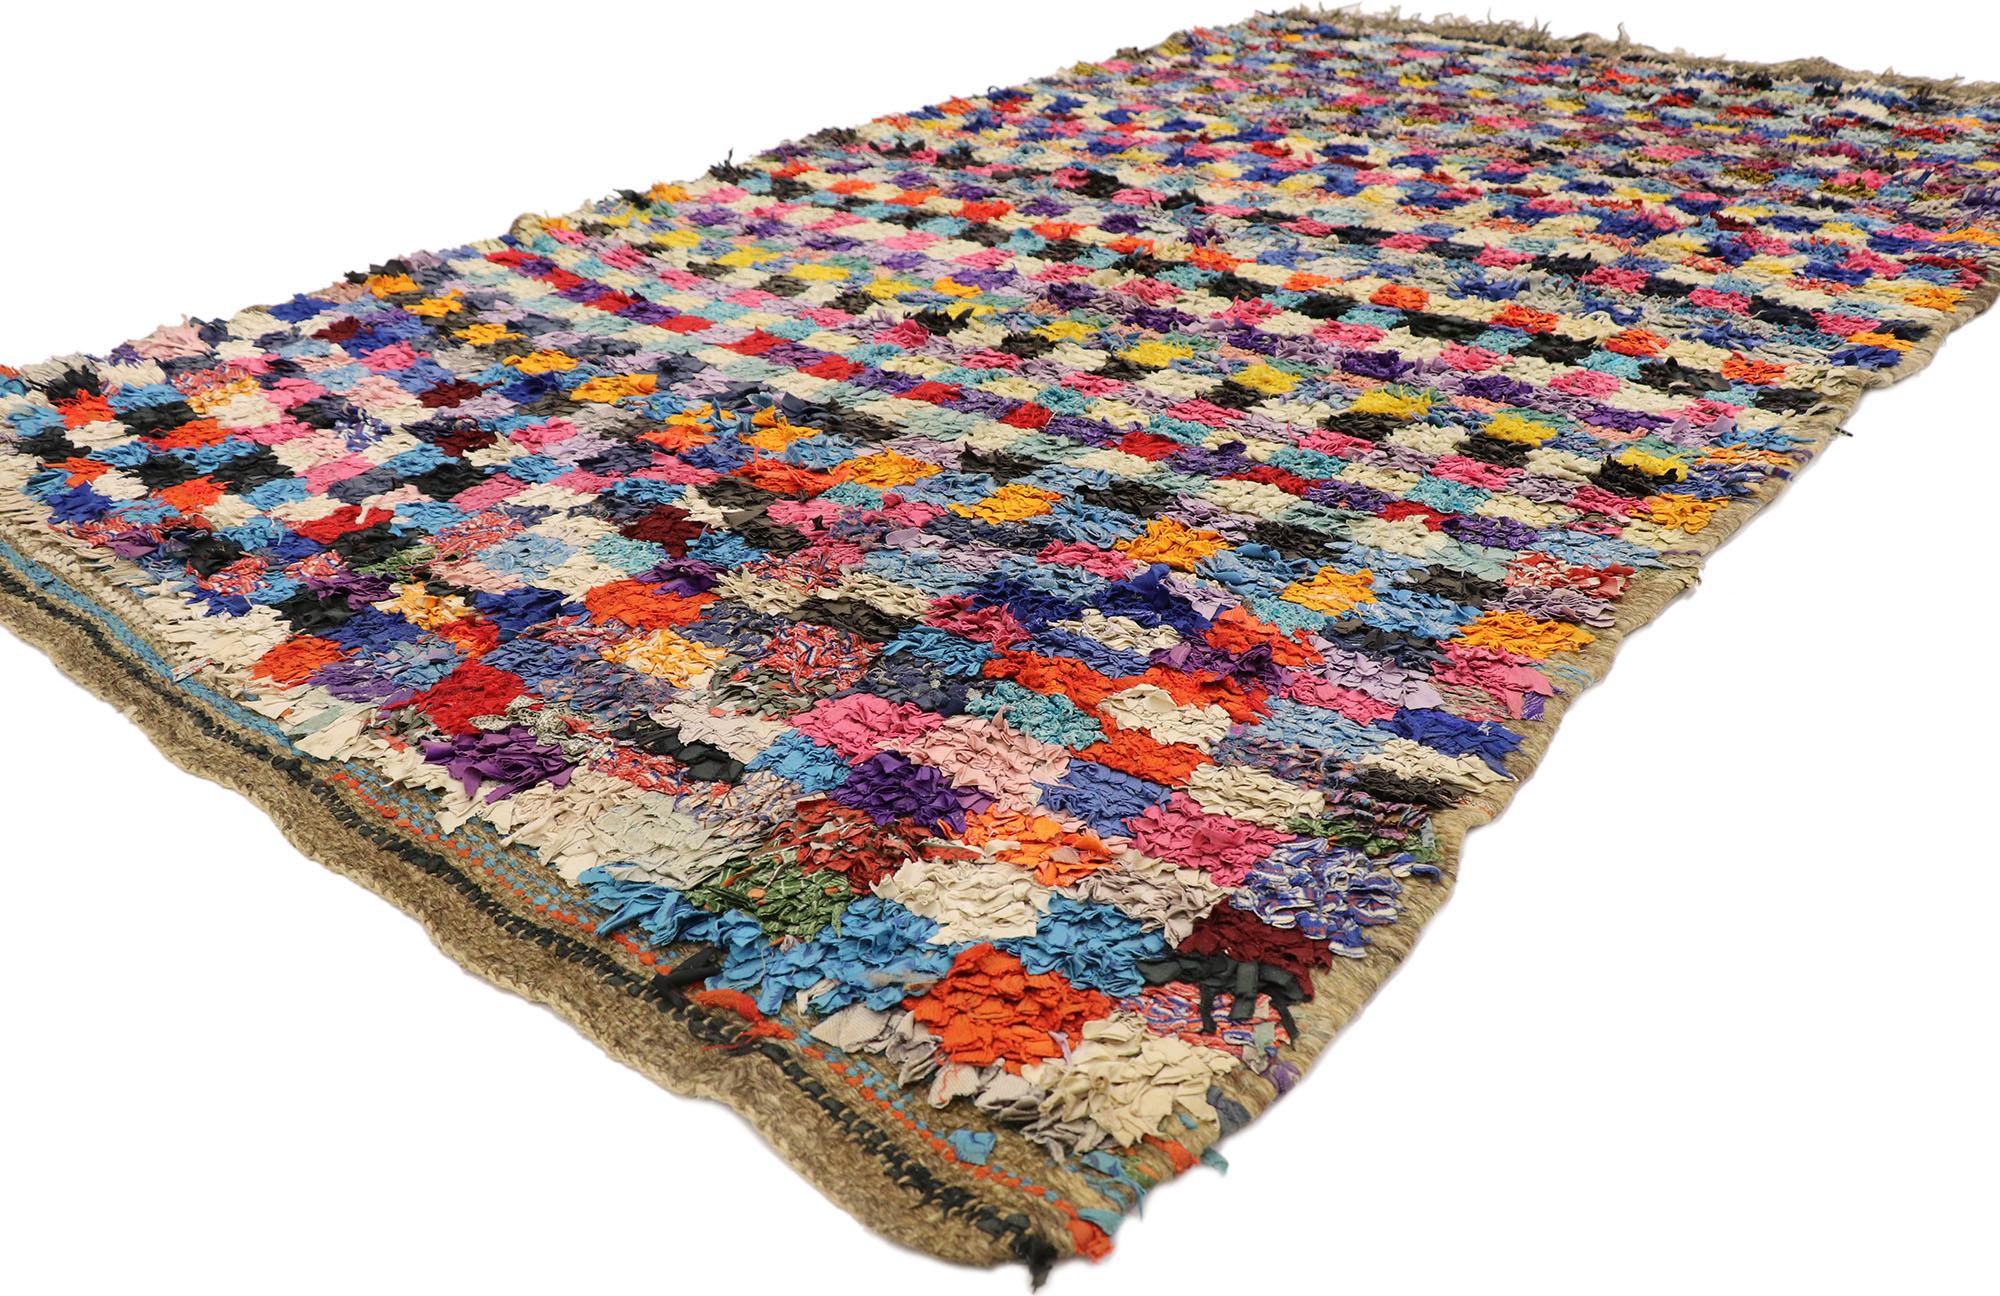 21544 vintage Berber Moroccan Boucherouite rug with Modern Cubist style 04'10 x 08'03. Showcasing a bold expressive design, incredible detail and texture, this hand knotted cotton and wool vintage Berber Moroccan Boucherouite rug is a captivating